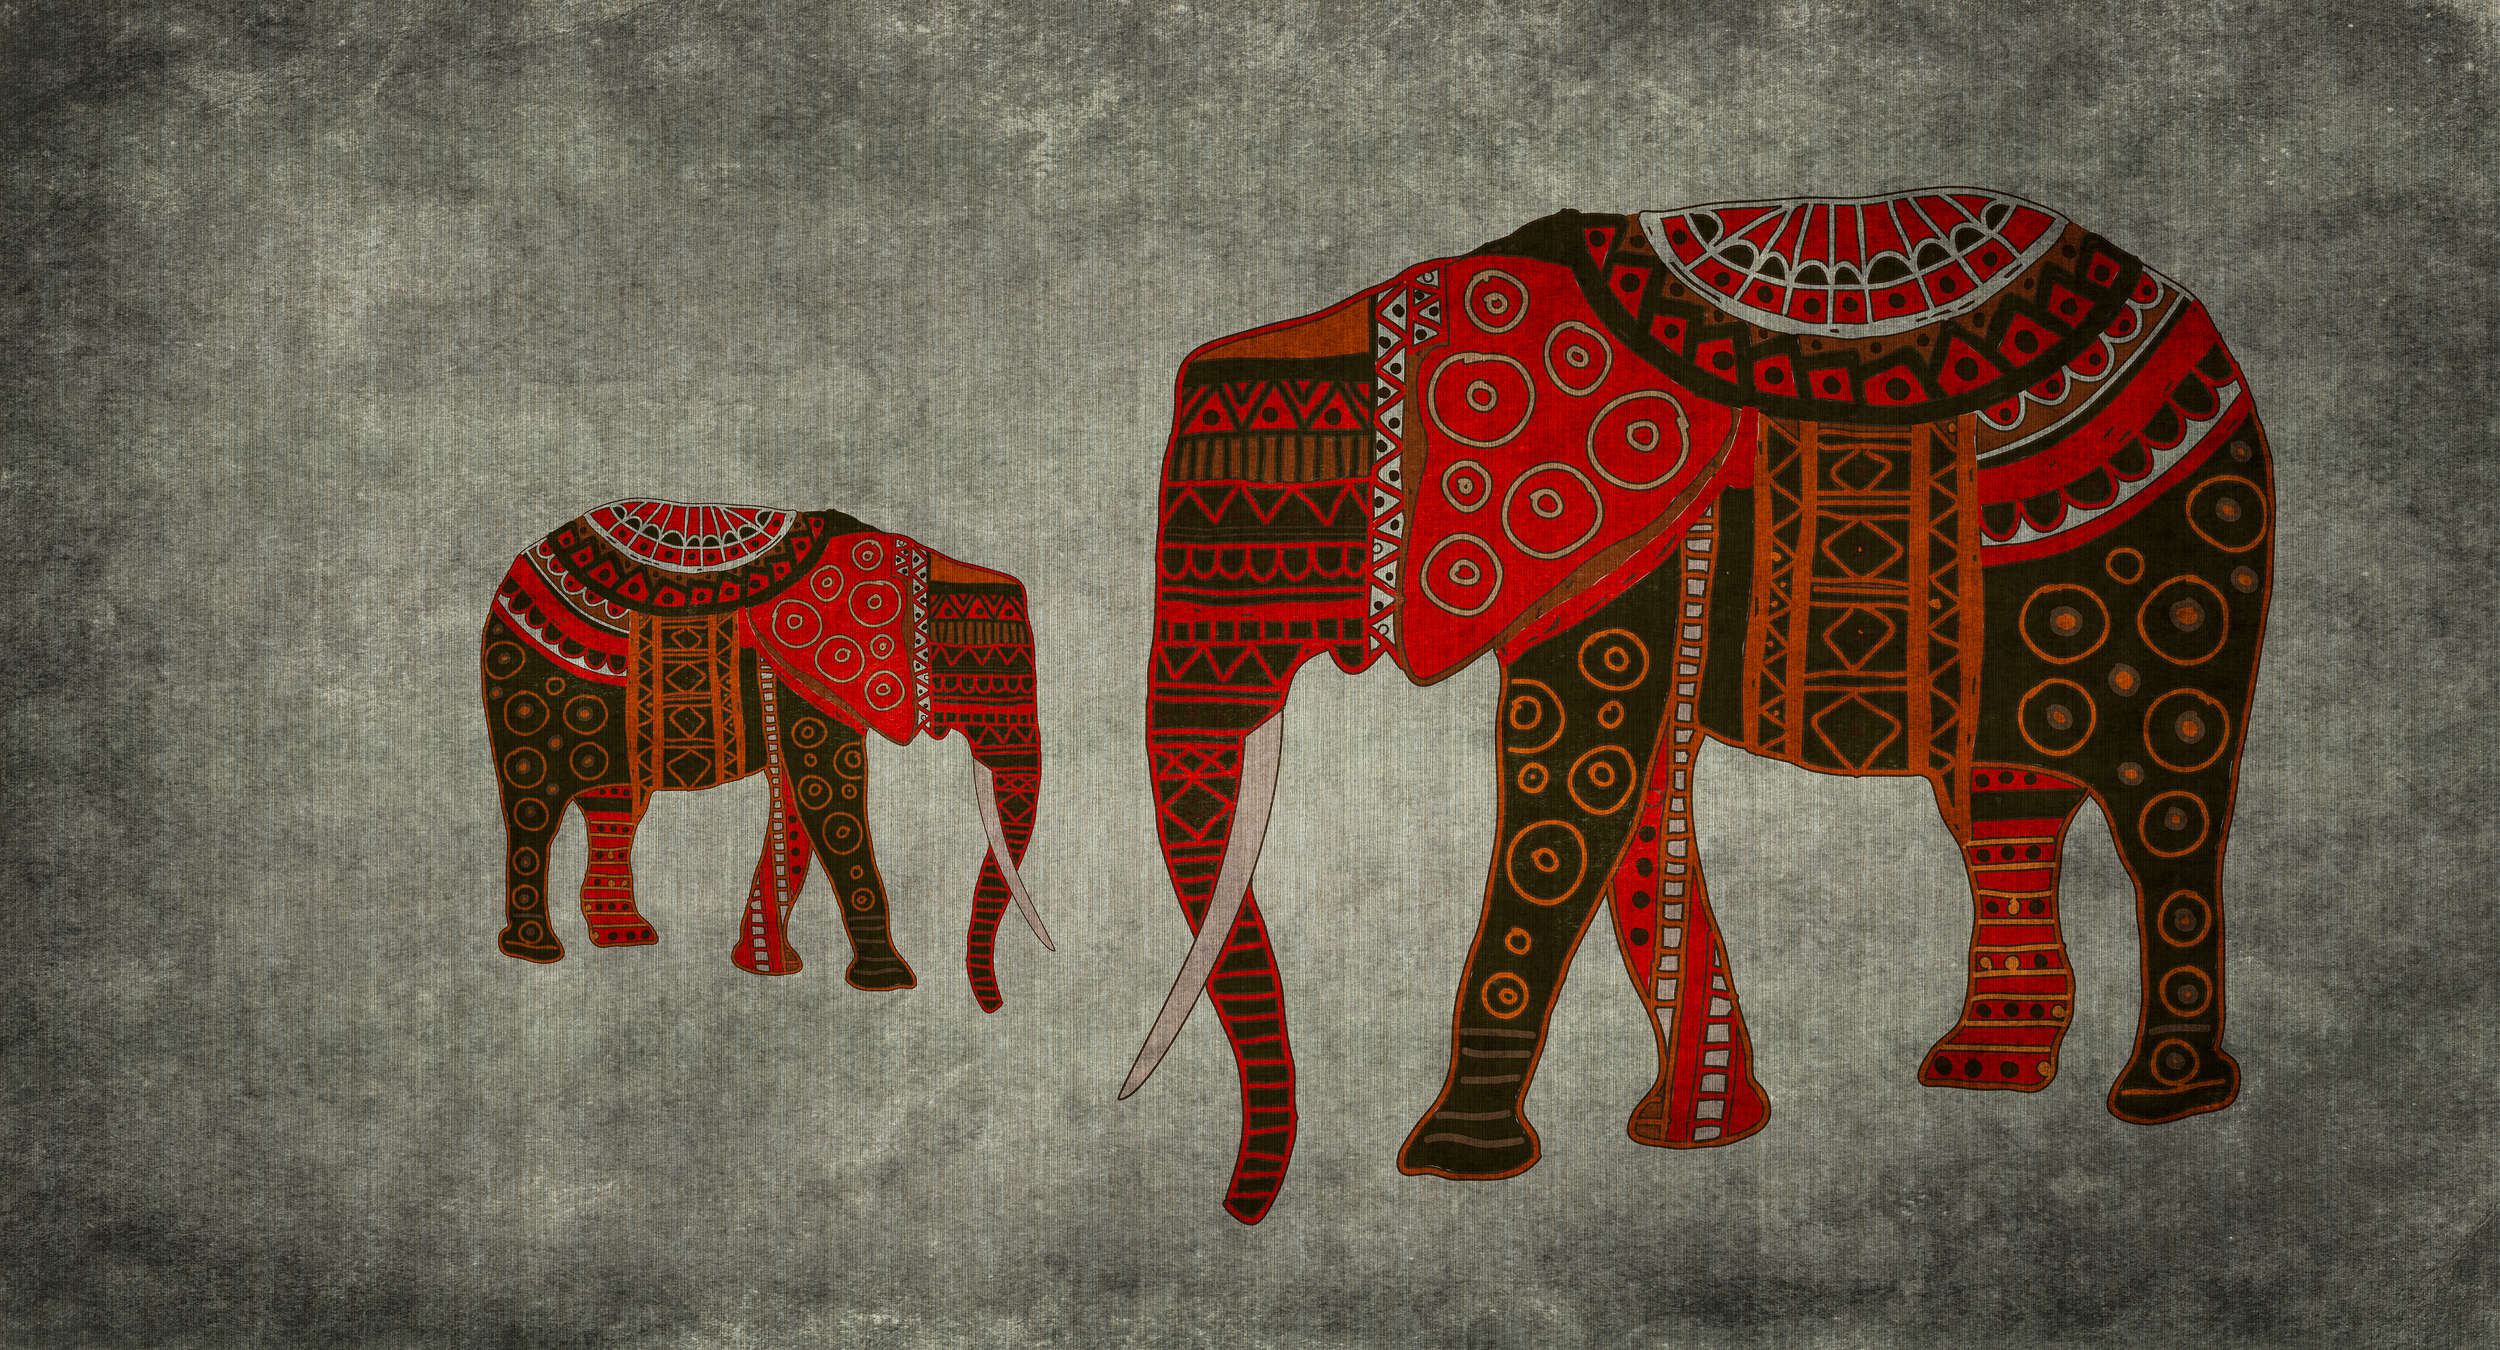             Nairobi 4 - Elephant mural with ethnic patterns & texture effect
        